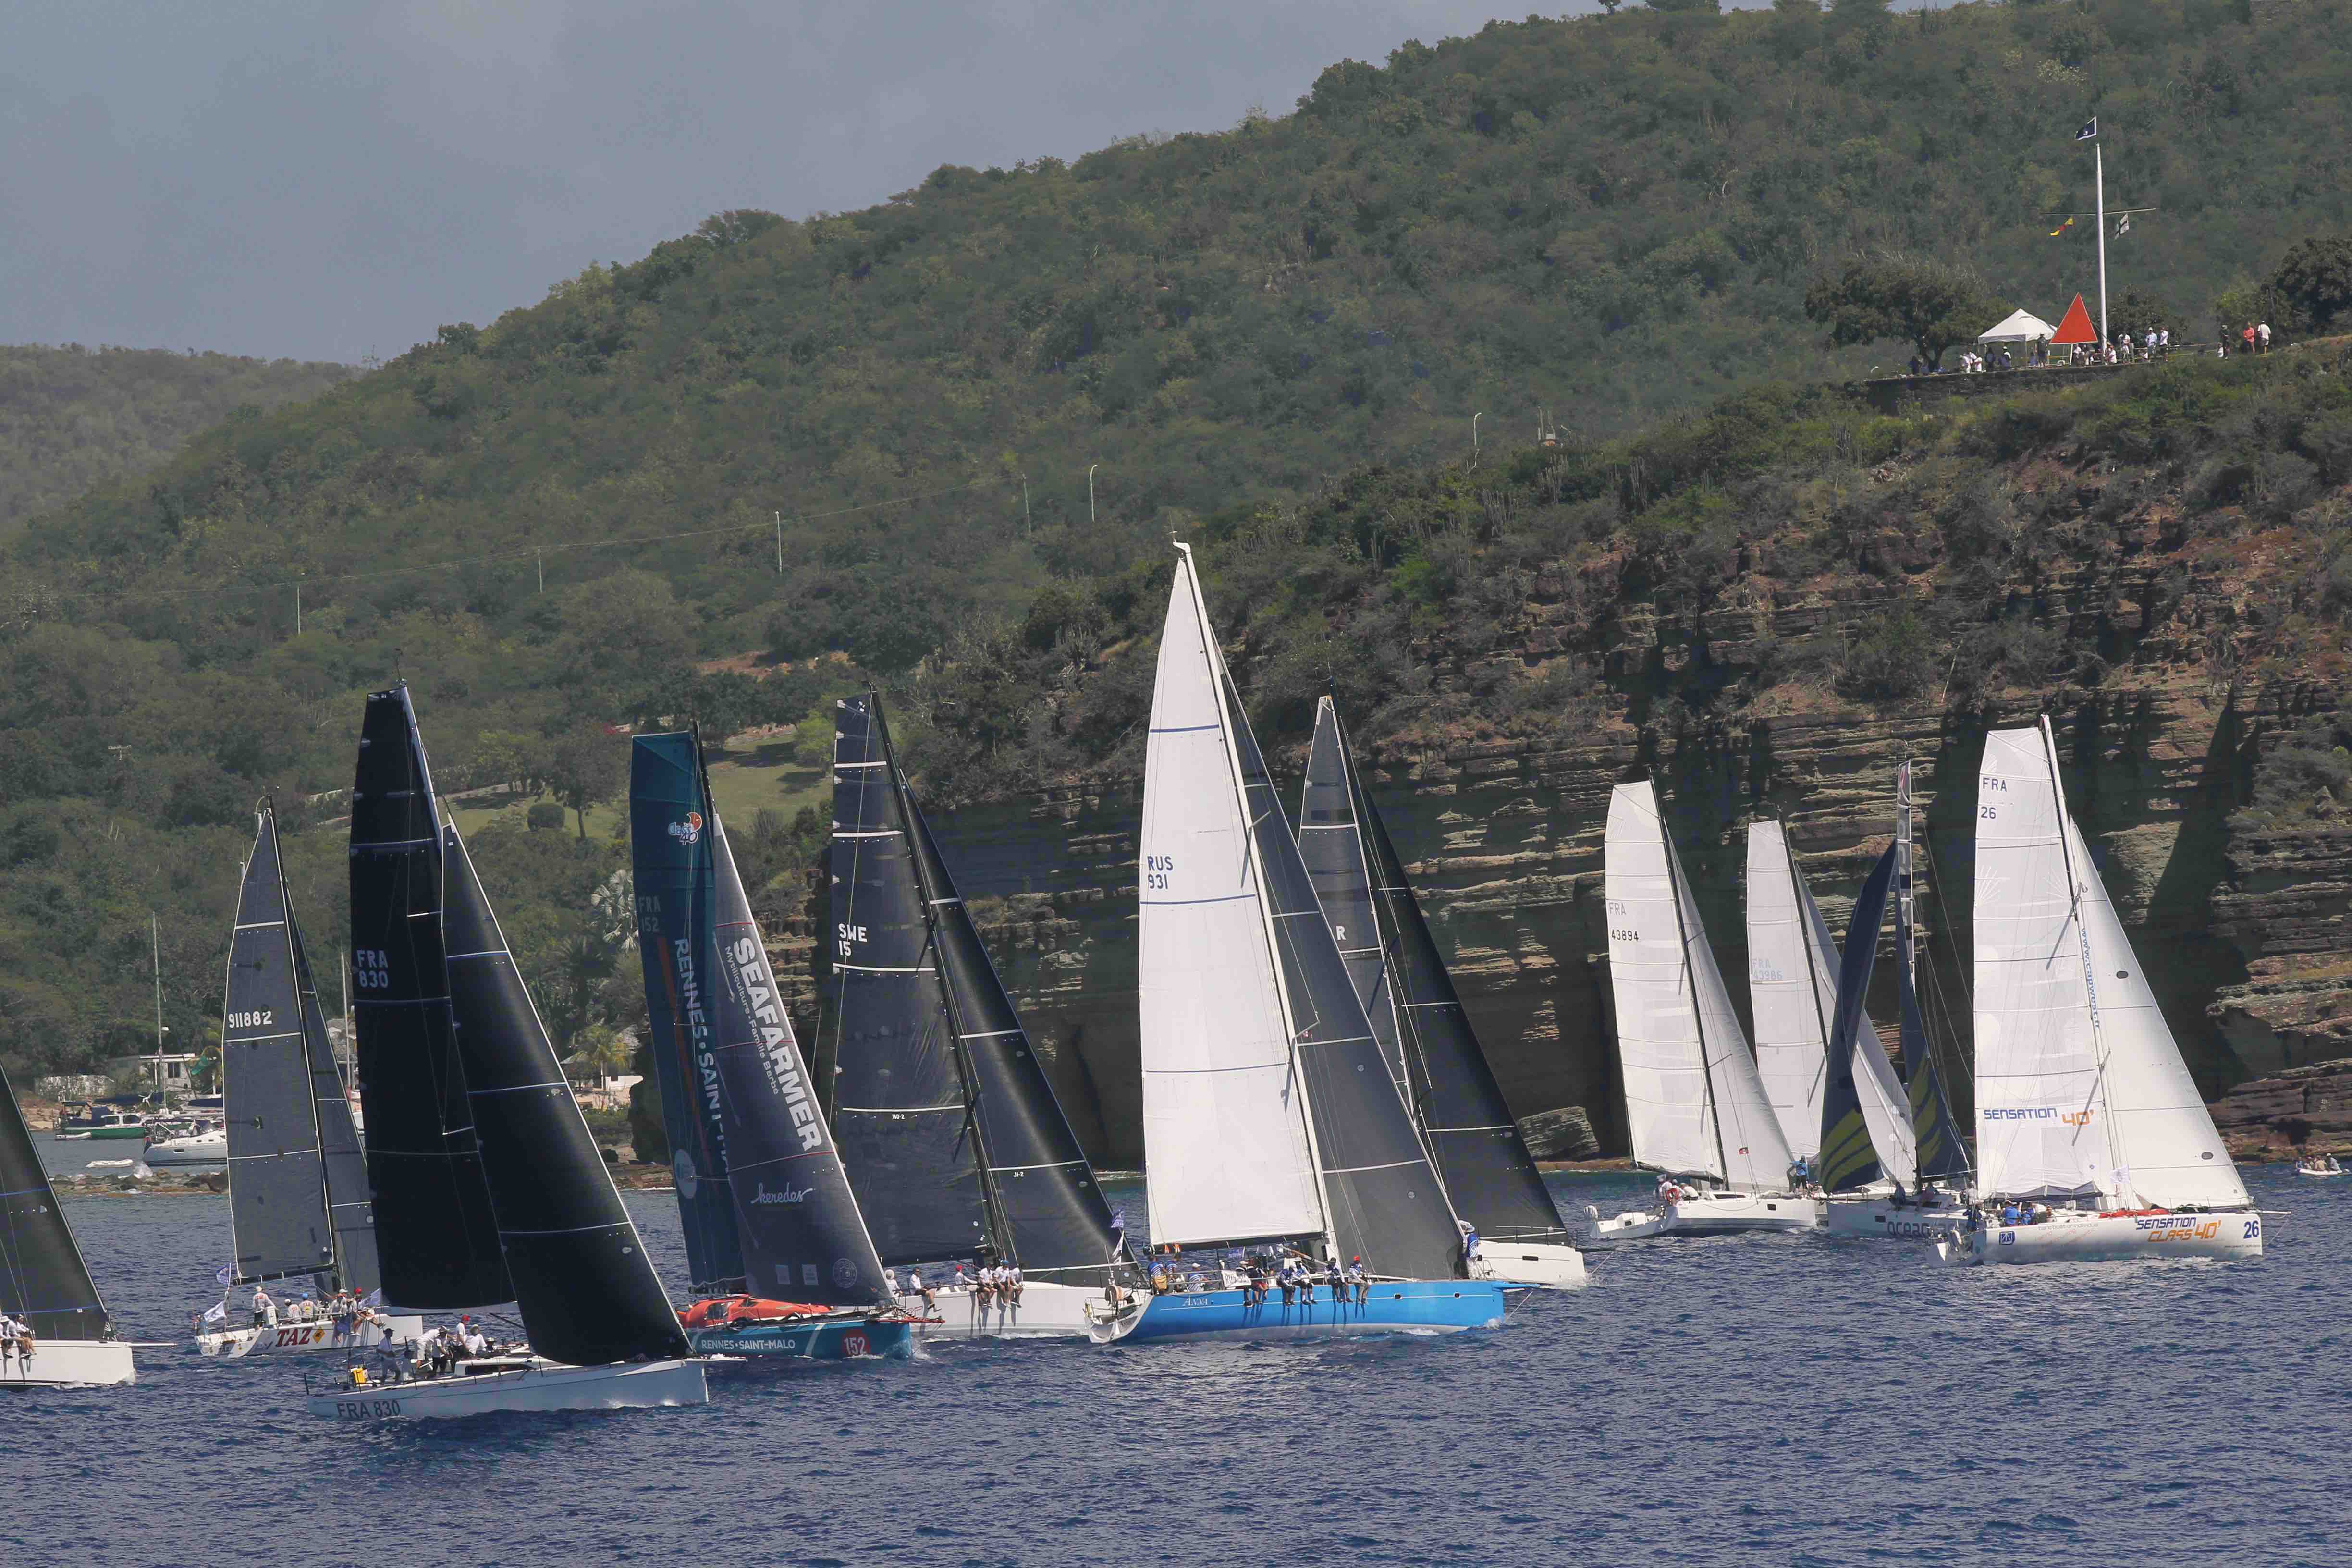 73 boats took the start in Antigua for the 12th edition of the RORC Caribbean 600 © Tim Wight / photoaction.com